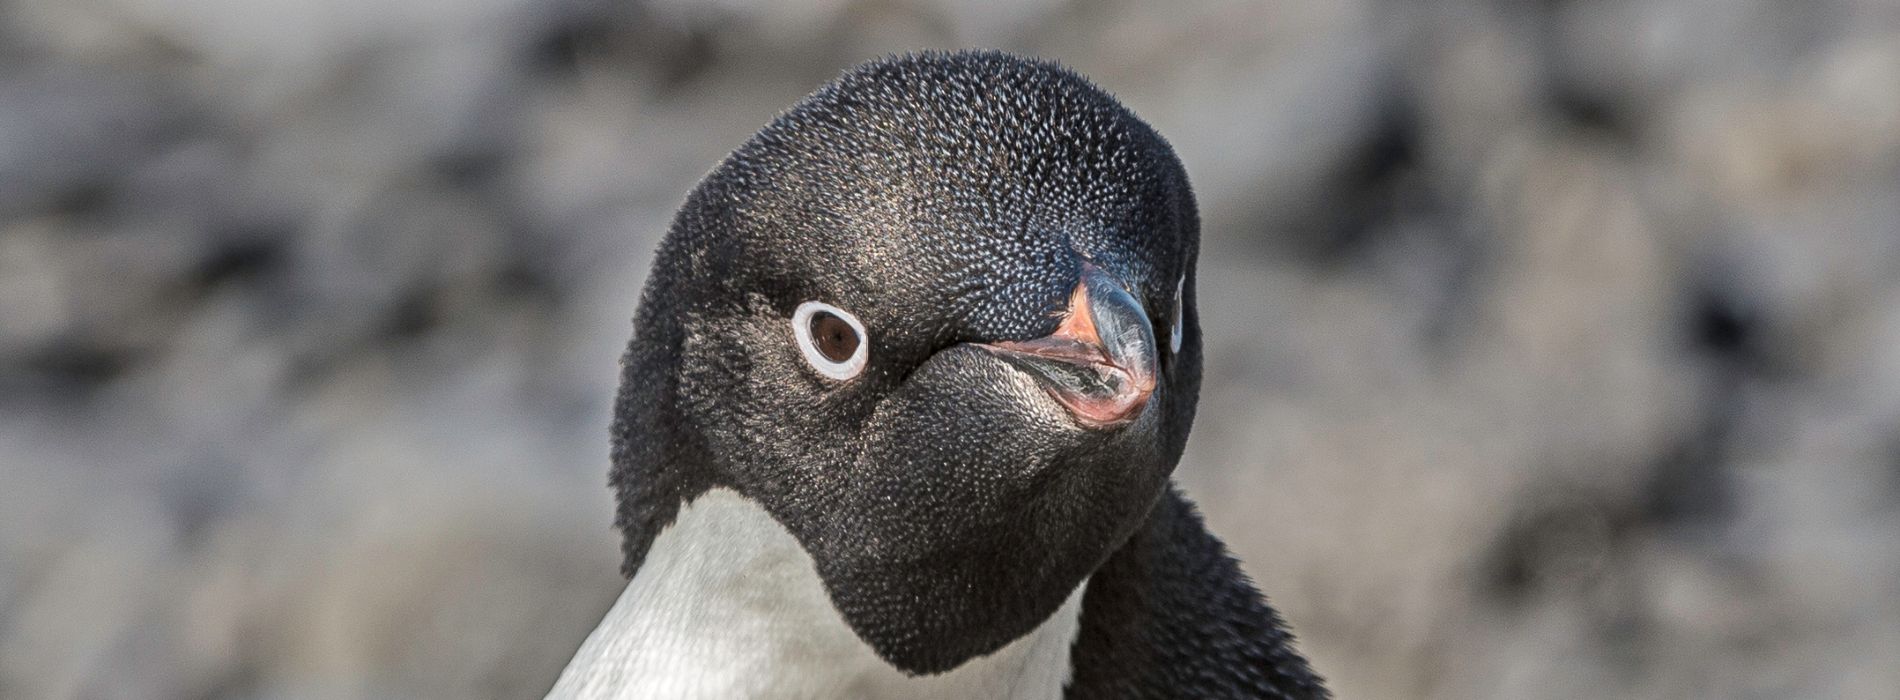 Adélie Penguin Biography: The Charming Waddlers of the Antarctic